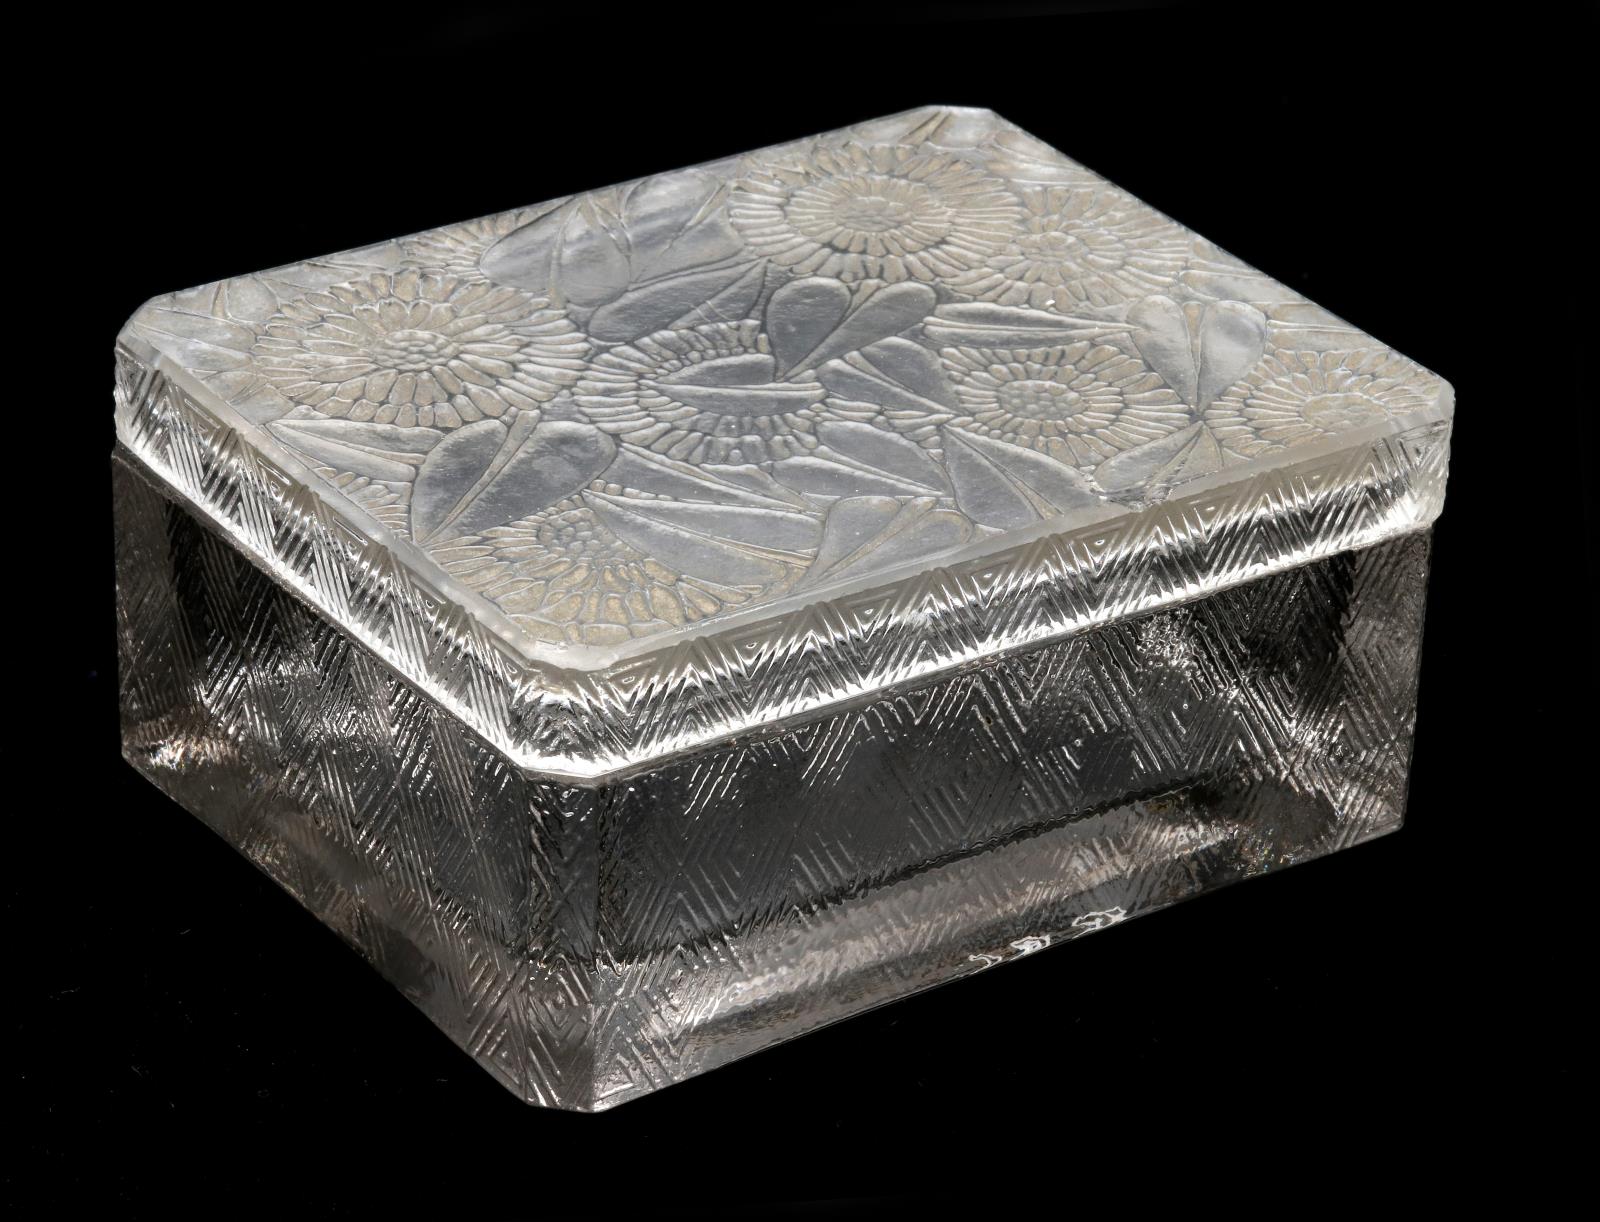 A FRENCH CRYSTAL BOX SIGNED R. LALIQUE